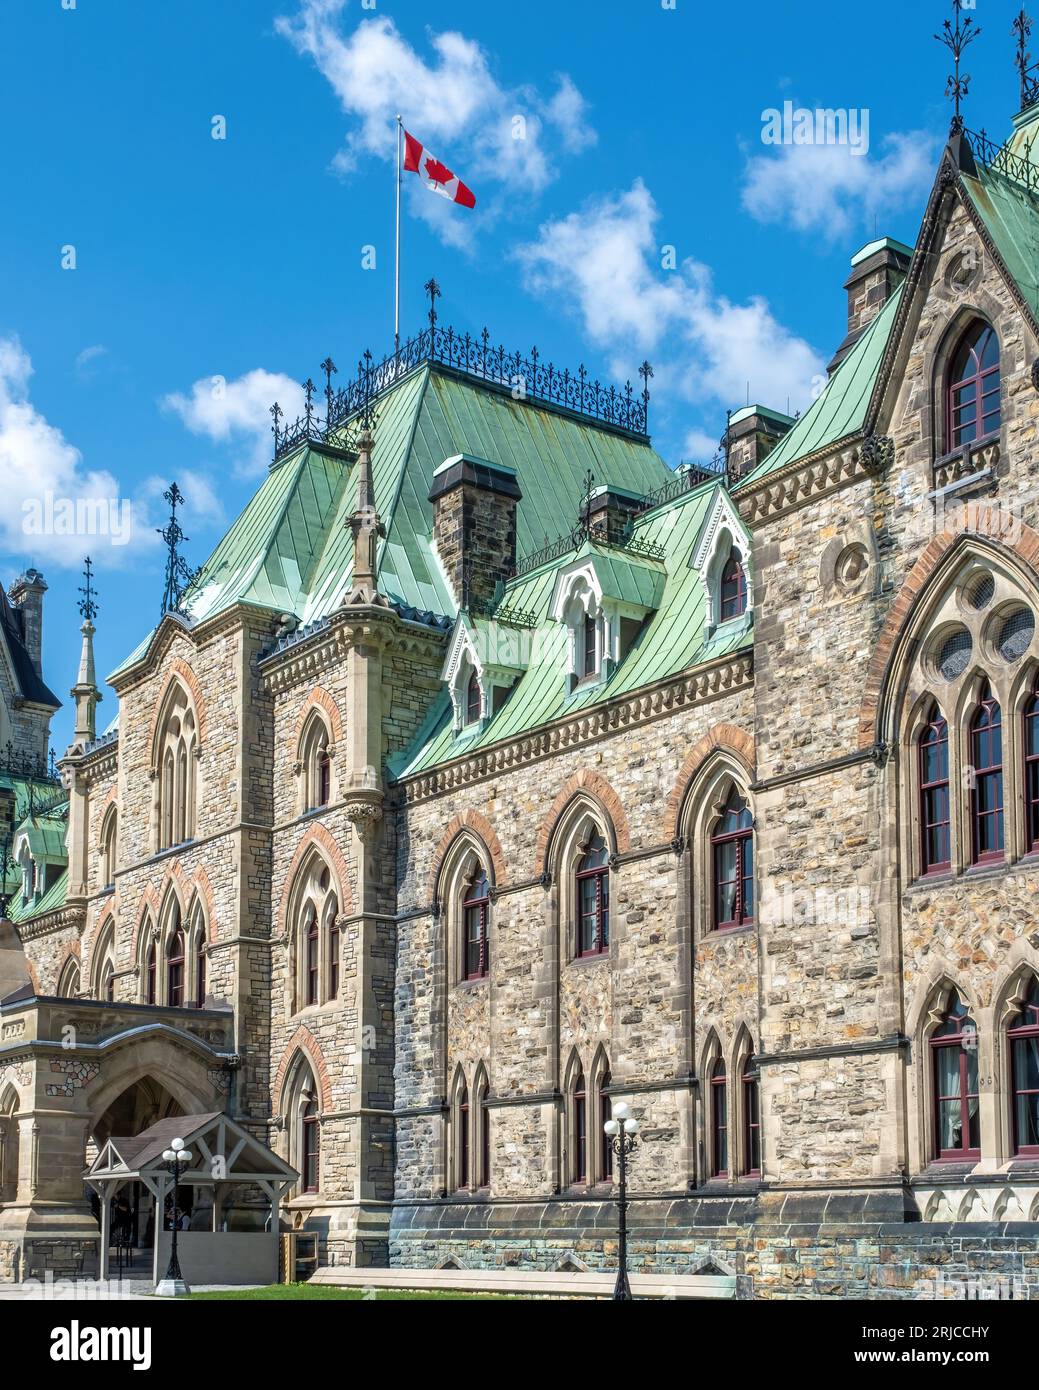 Built in 1859 to house the offices of parliamentarians and senators, the historic East Block of the Canadian parliament continues to house offices of Stock Photo